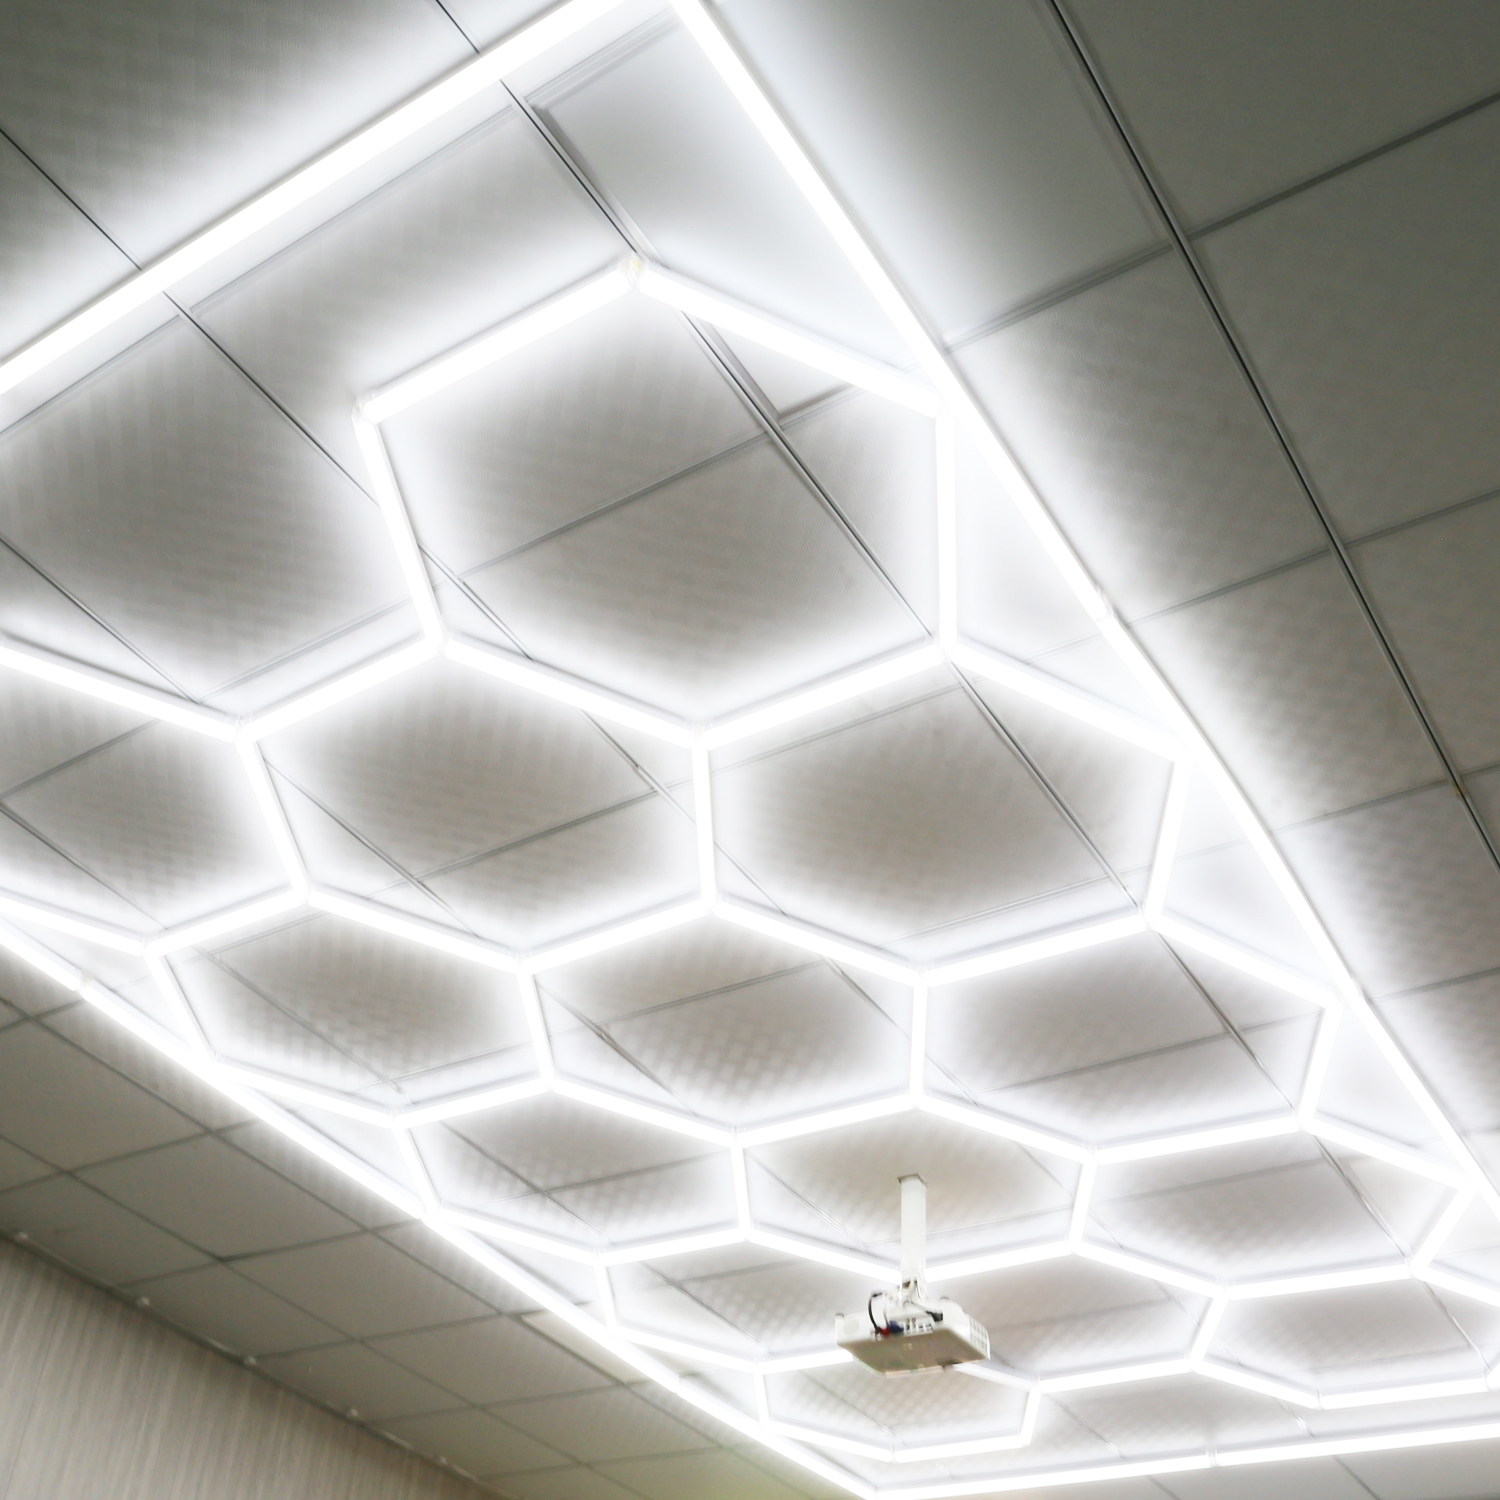 Transform Your Space with Hexagonal Honeycomb LED Lighting